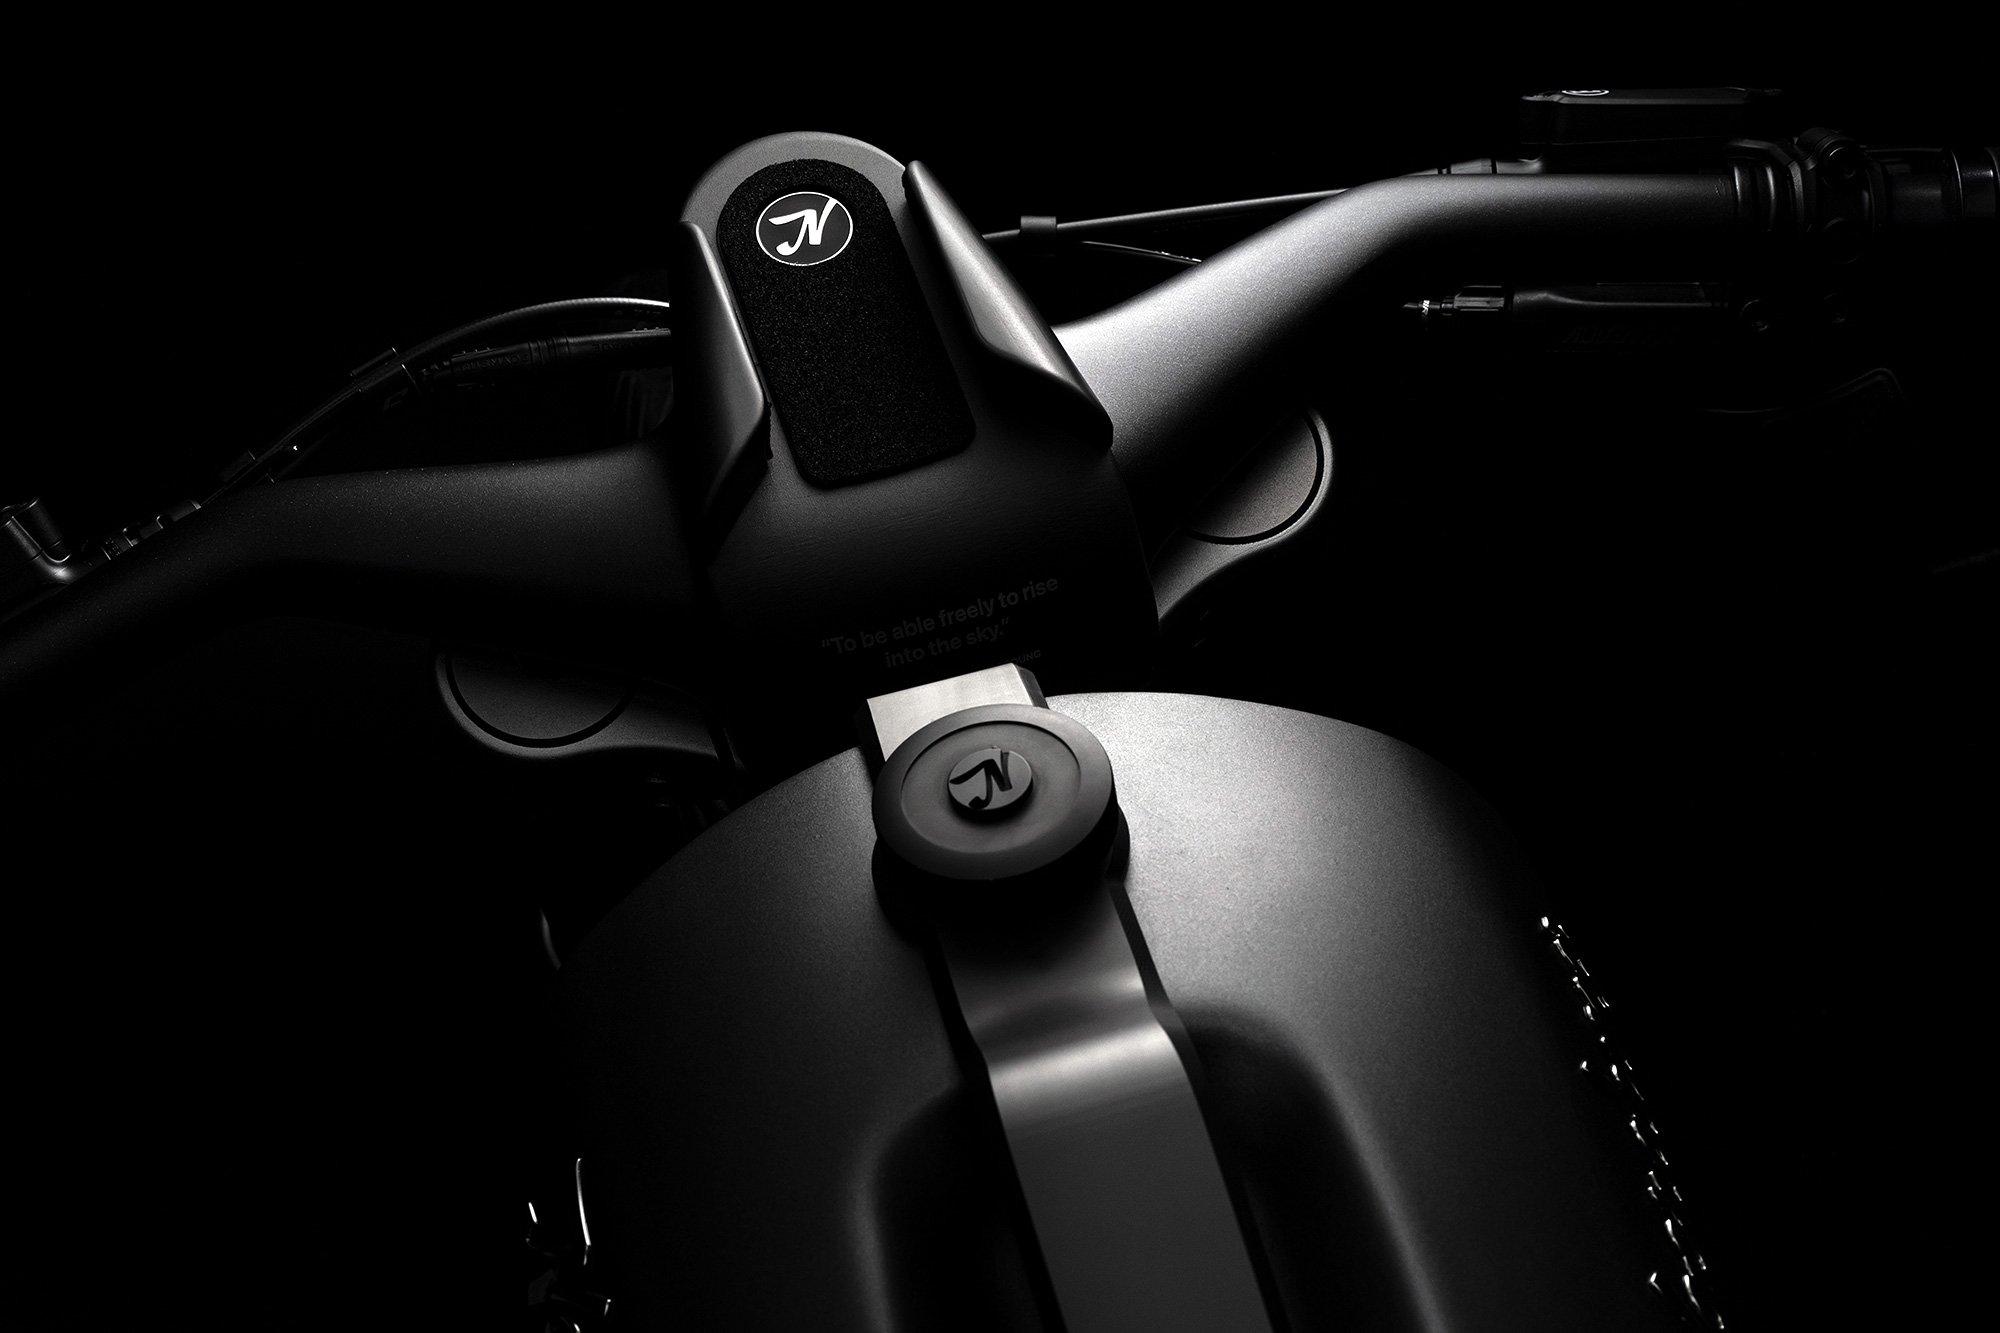 The design of the innovative e-bike by Noordung 